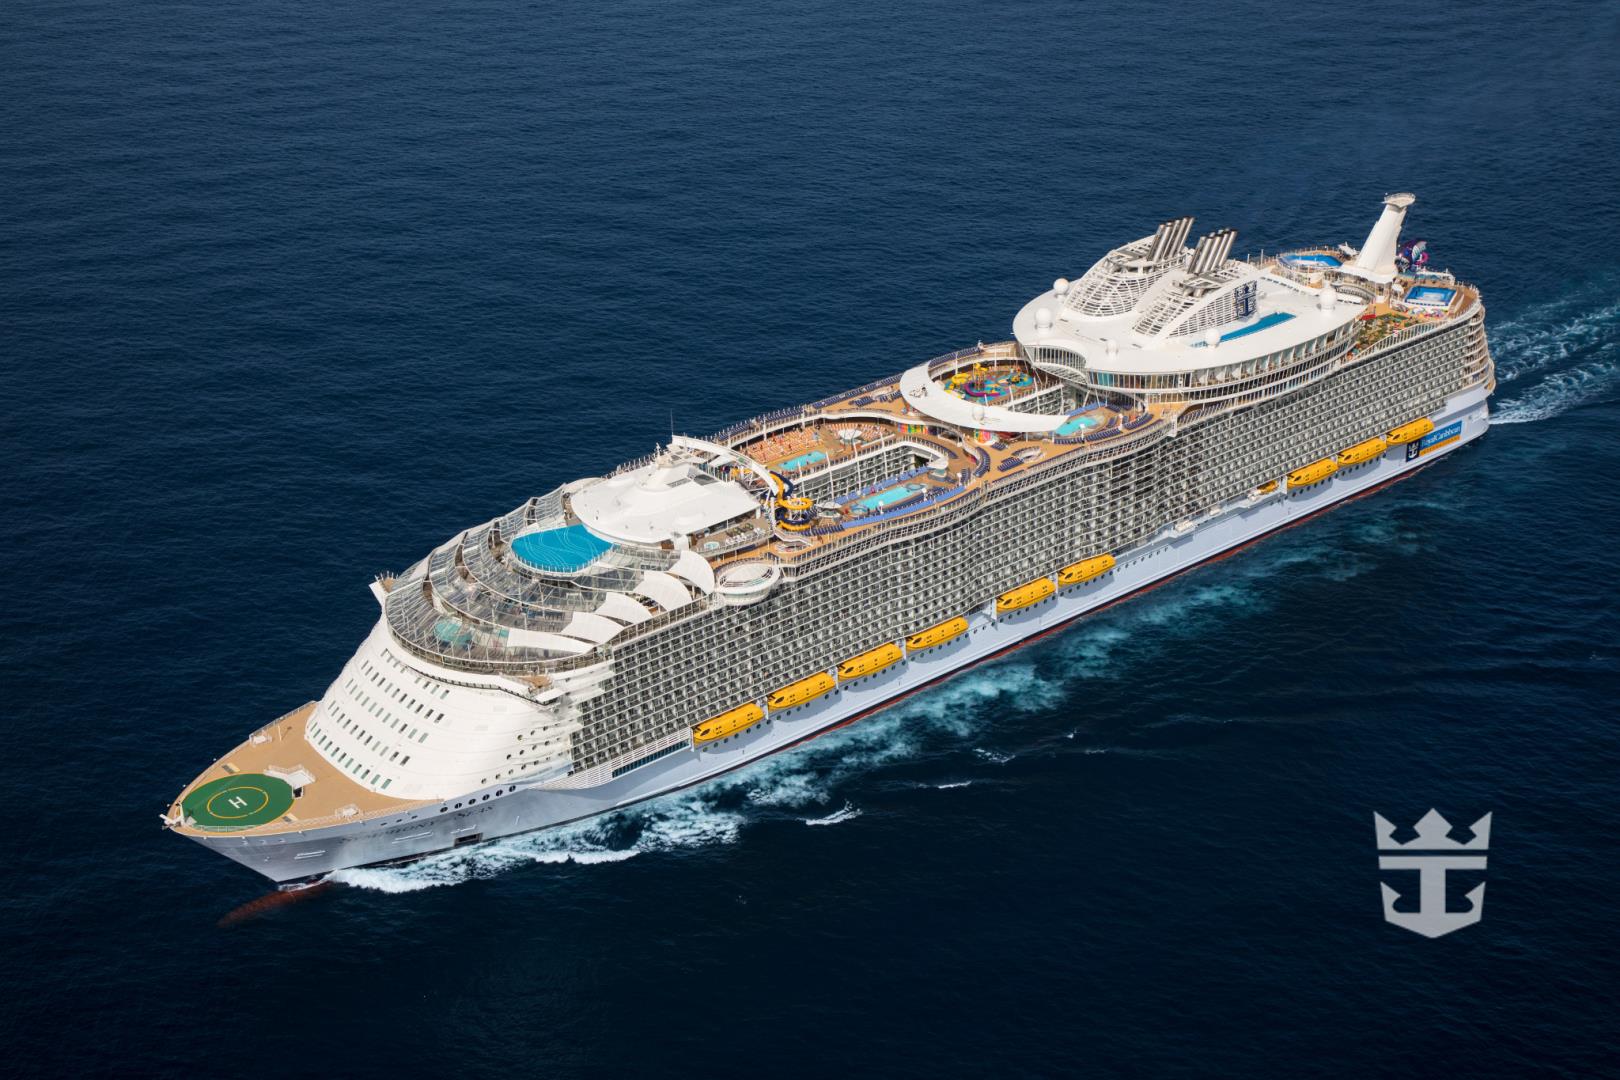 Aerial view of Symphony of the Seas at sea offshore Barcelona, Spain